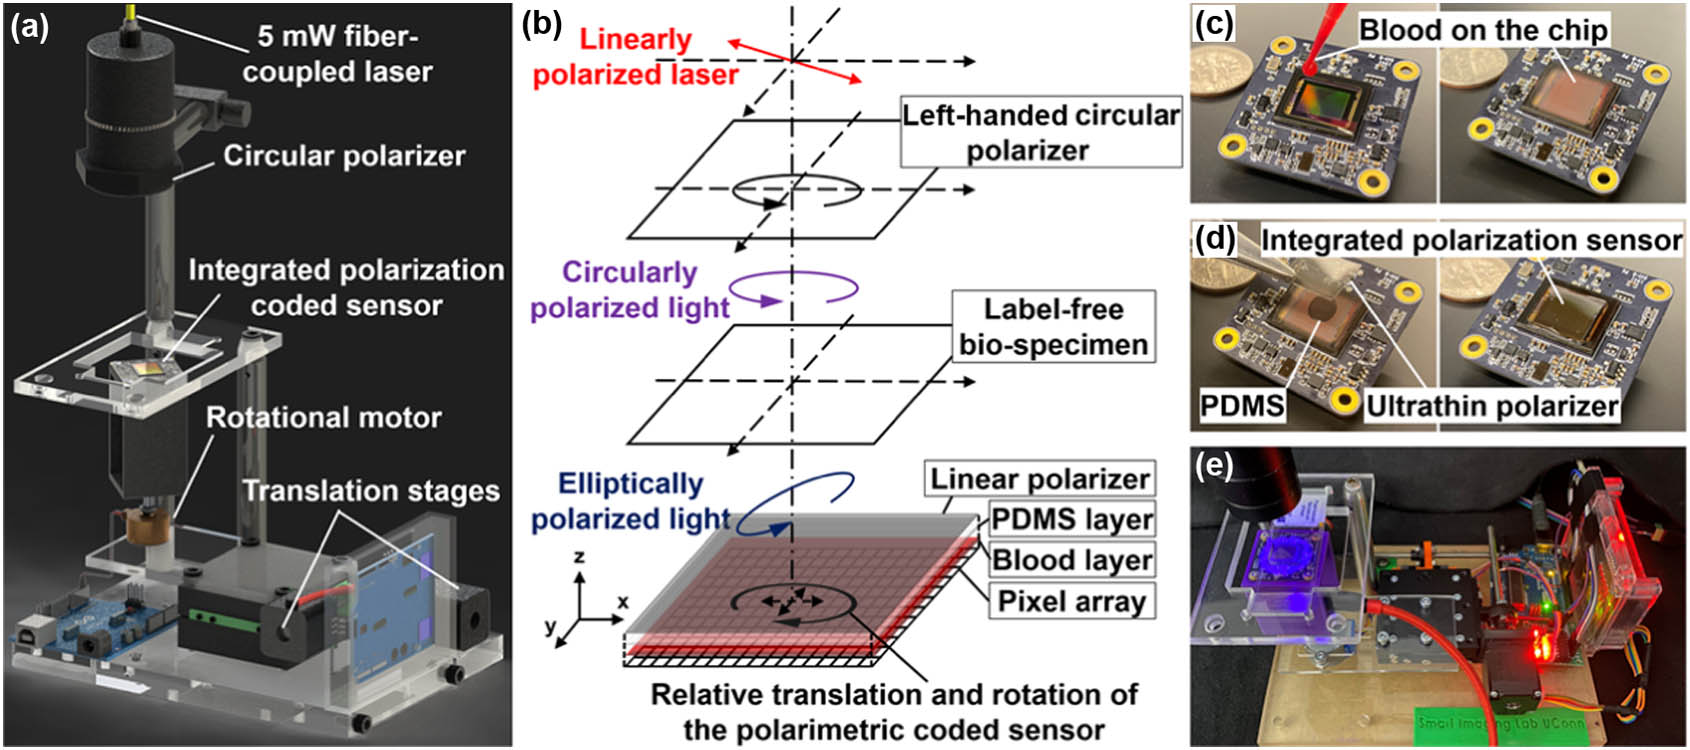 Schematic diagram and operation of the lensless polarimetric coded ptychography (pol-CP) platform. (a) A circular polarizer transforms linearly polarized light from the laser diode into circularly polarized light, which then interacts with the specimen. The exit wave is recorded by the integrated polarimetric coded image sensor. (b) Illustration of changes in the polarization state within the pol-CP system. (c) A 2 μL sample of goat blood is smeared onto the sensor’s coverglass and fixed with ethyl alcohol, forming a thin and dense blood-cell layer that acts as a high-performance scattering lens with a theoretically unlimited field of view. (d) An ultrathin polarizing film is adhered to the blood-cell layer, forming an integrated polarimetric coded image sensor. (e) The pol-CP prototype features a polarimetric coded sensor mounted on programmable stages, allowing control over both rotational and translational motions.